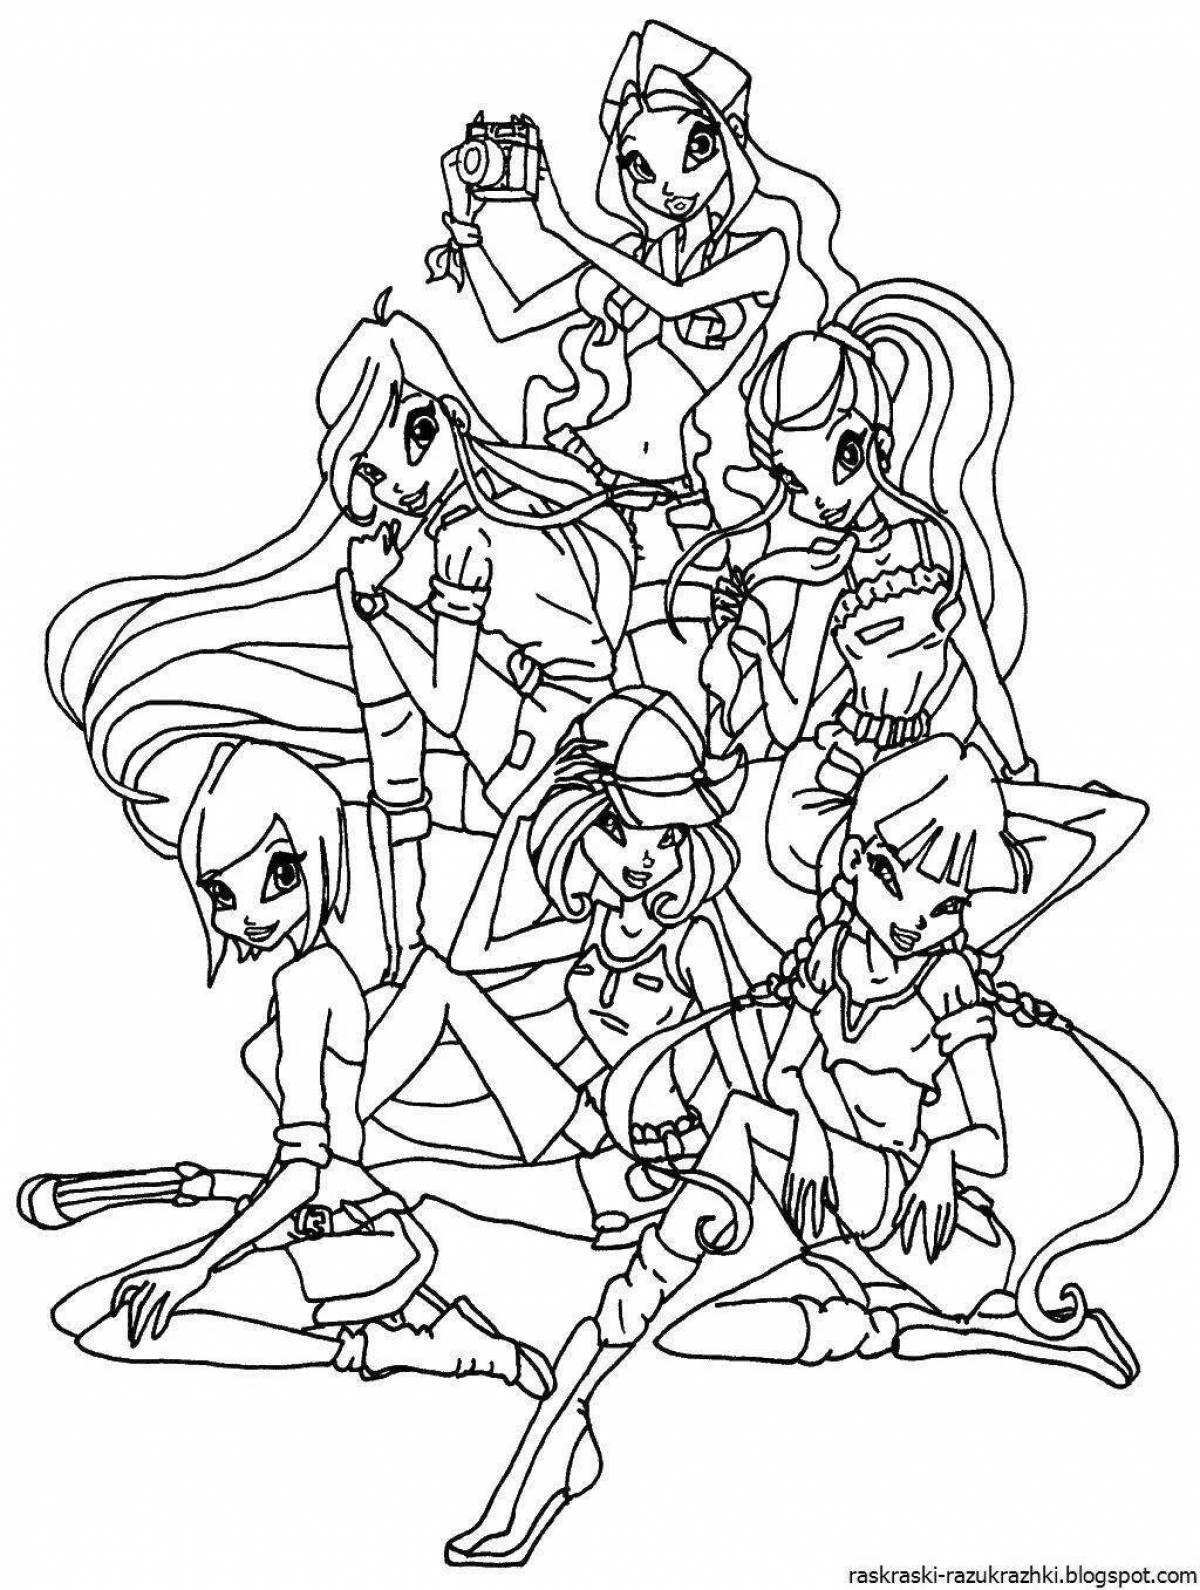 Winx Christmas coloring book